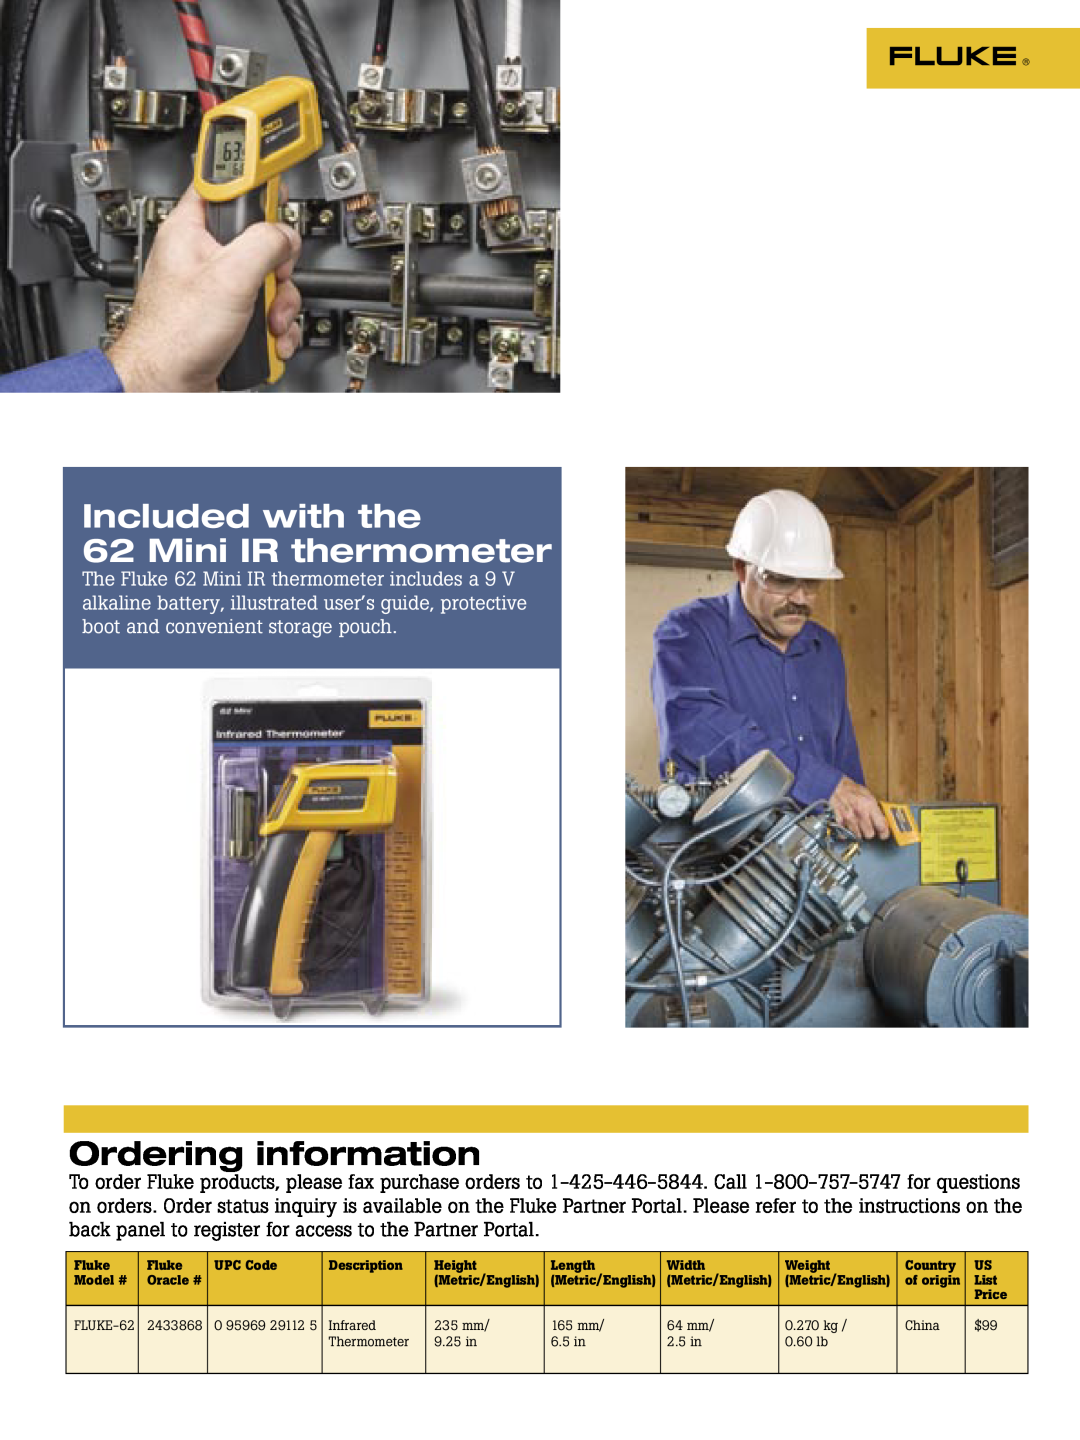 Fluke 66, 572, 68, 574, 576, 63 brochure Included with the 62 Mini IR thermometer, Ordering information 